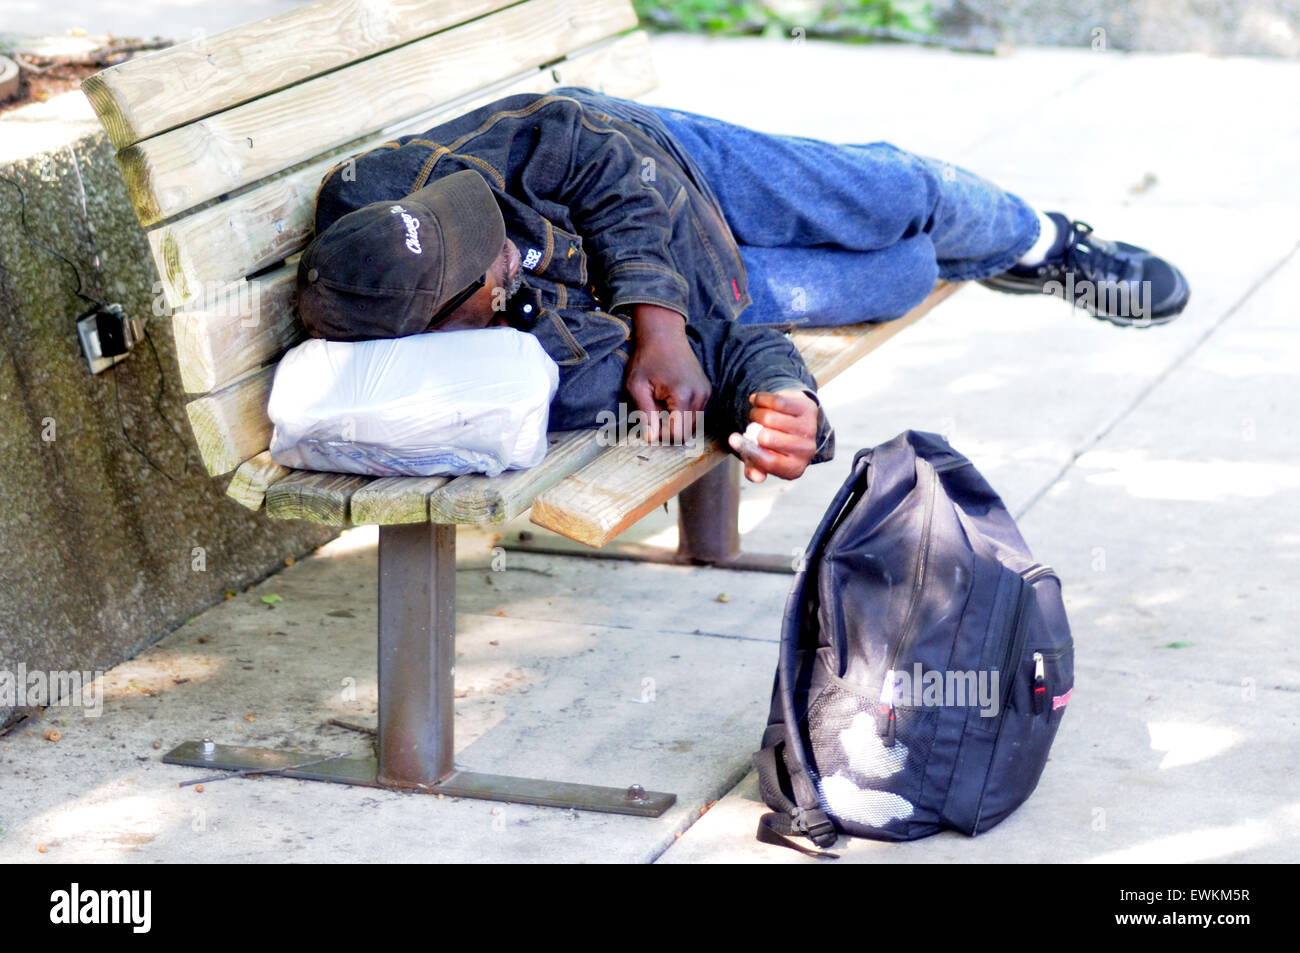 Homeless man sleeping on bench in a public park Stock Photo